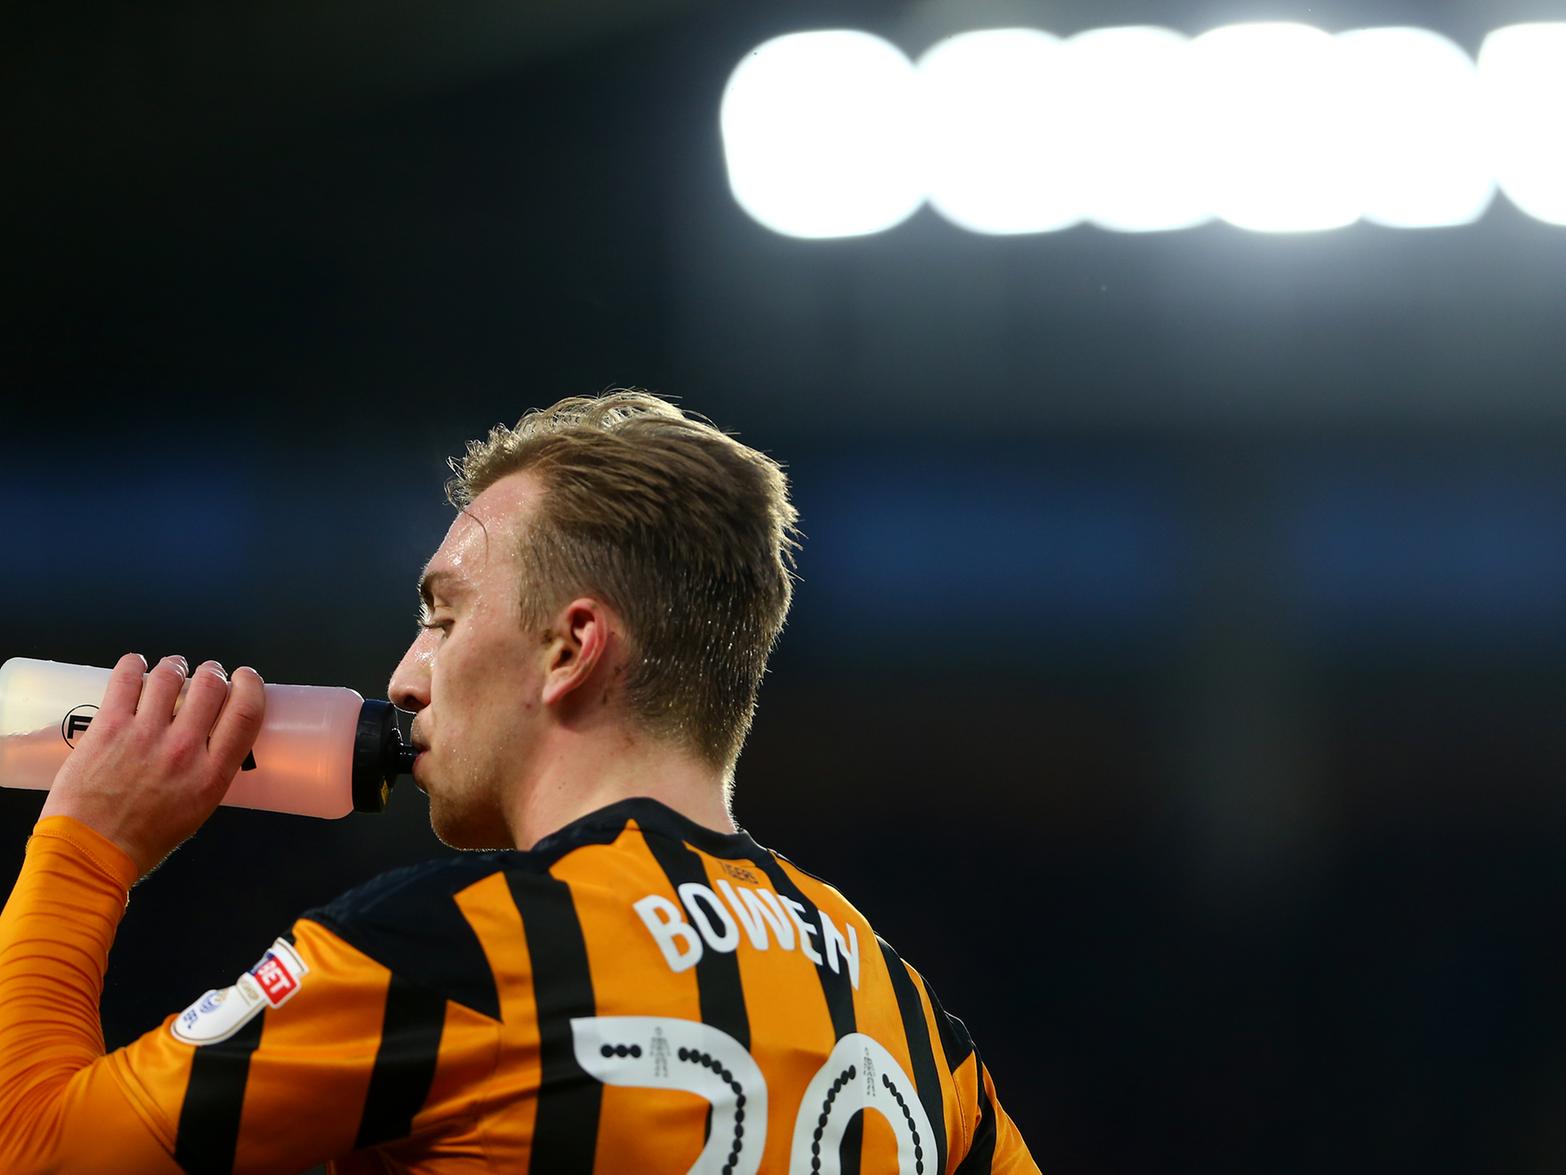 Hull City talisman Jarrod Bowen, who scored both goals in his side's 2-0 win over Derby last weekend, is understood to be taking his time over making a decision over his future, amid increasing Premier League interest. (Hull Daily Mail)